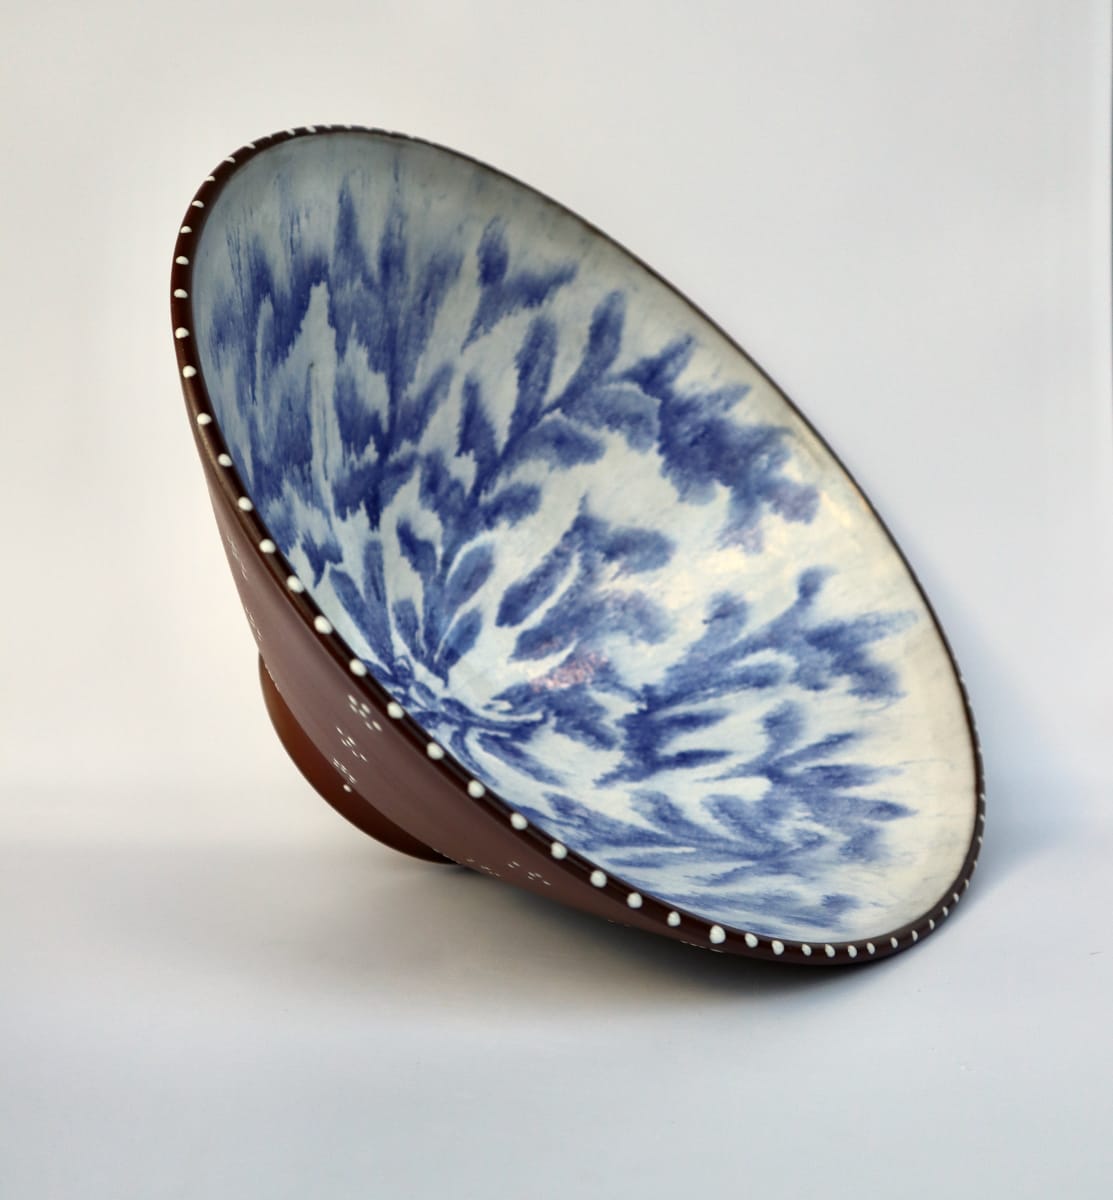 Serving Bowl, 1 by Nicole McLaughlin 